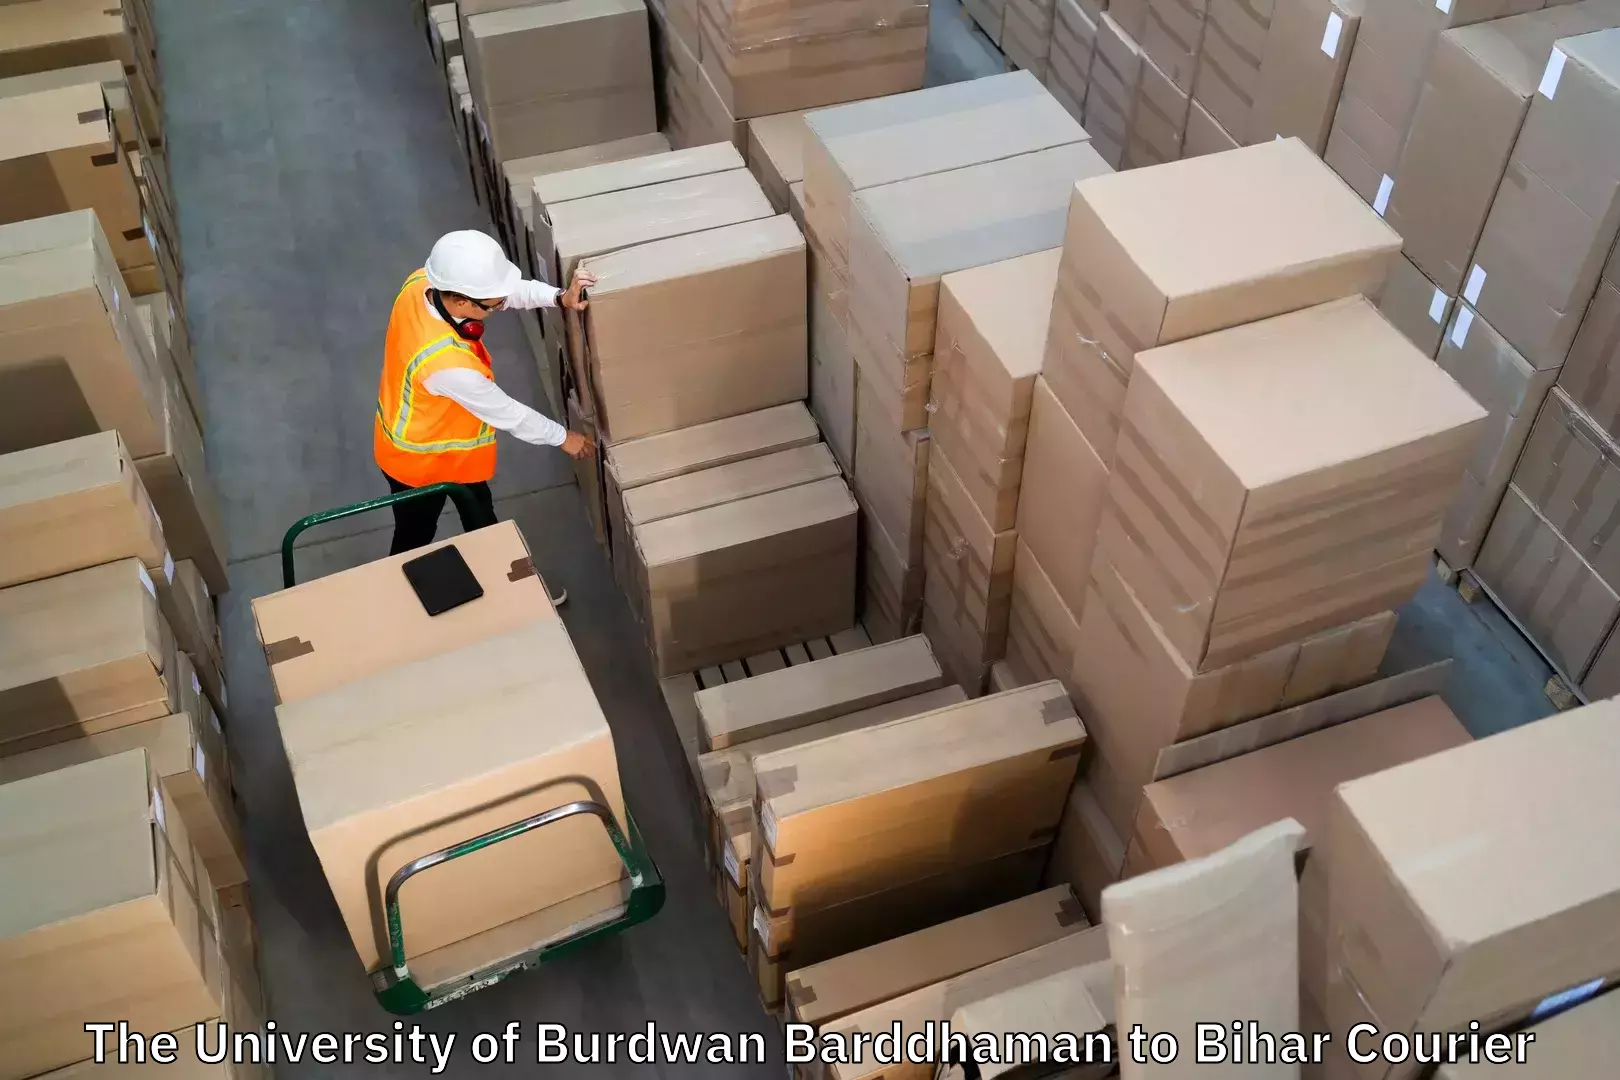 Personal effects shipping in The University of Burdwan Barddhaman to Dehri